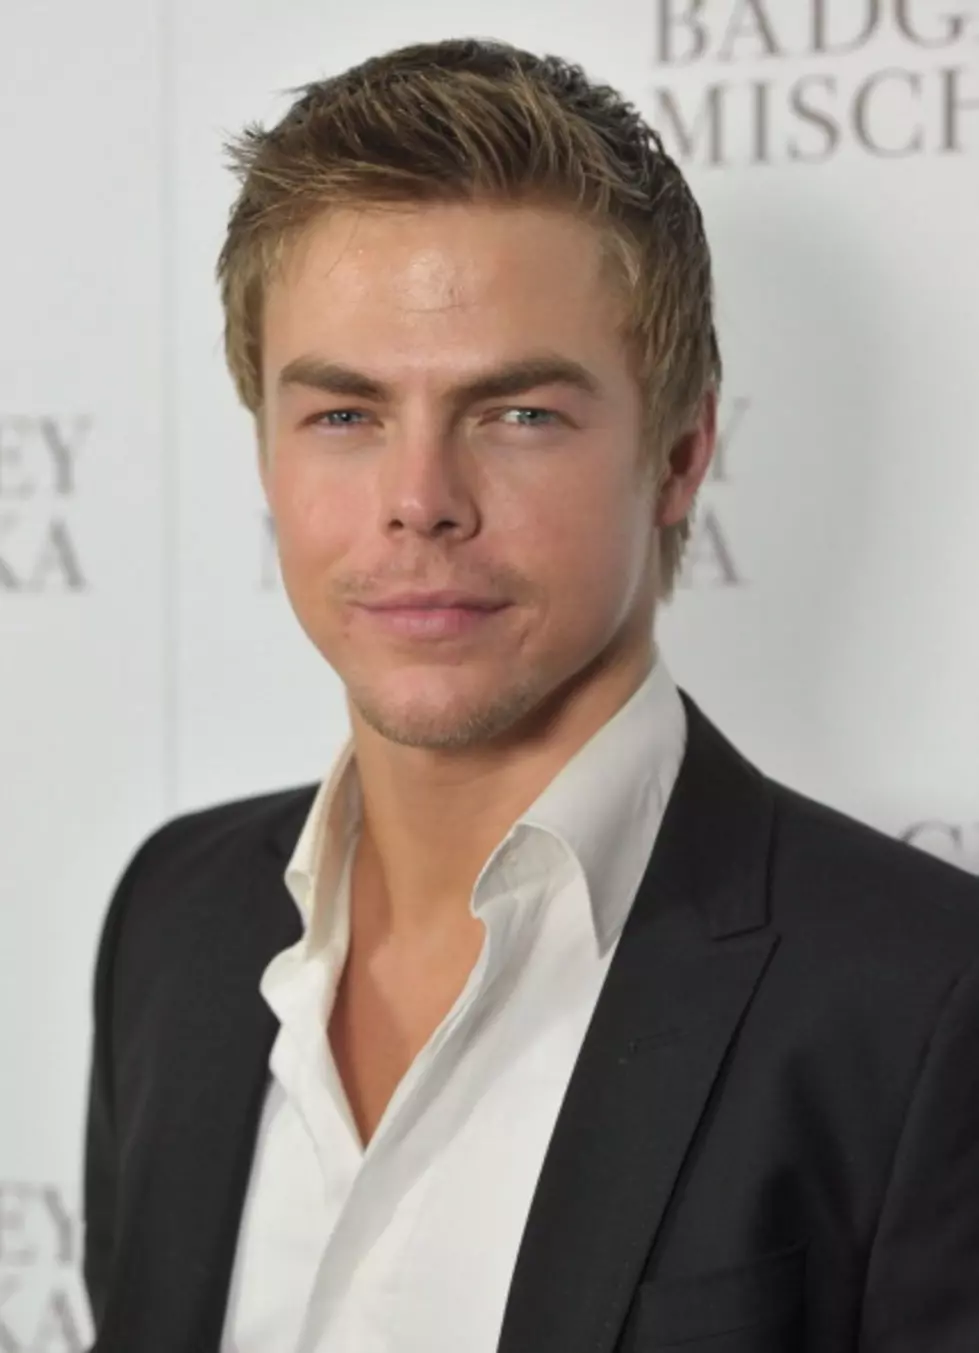 Today’s Celebrity Birthdays Include Derek Hough of ‘Dancing With the Stars’